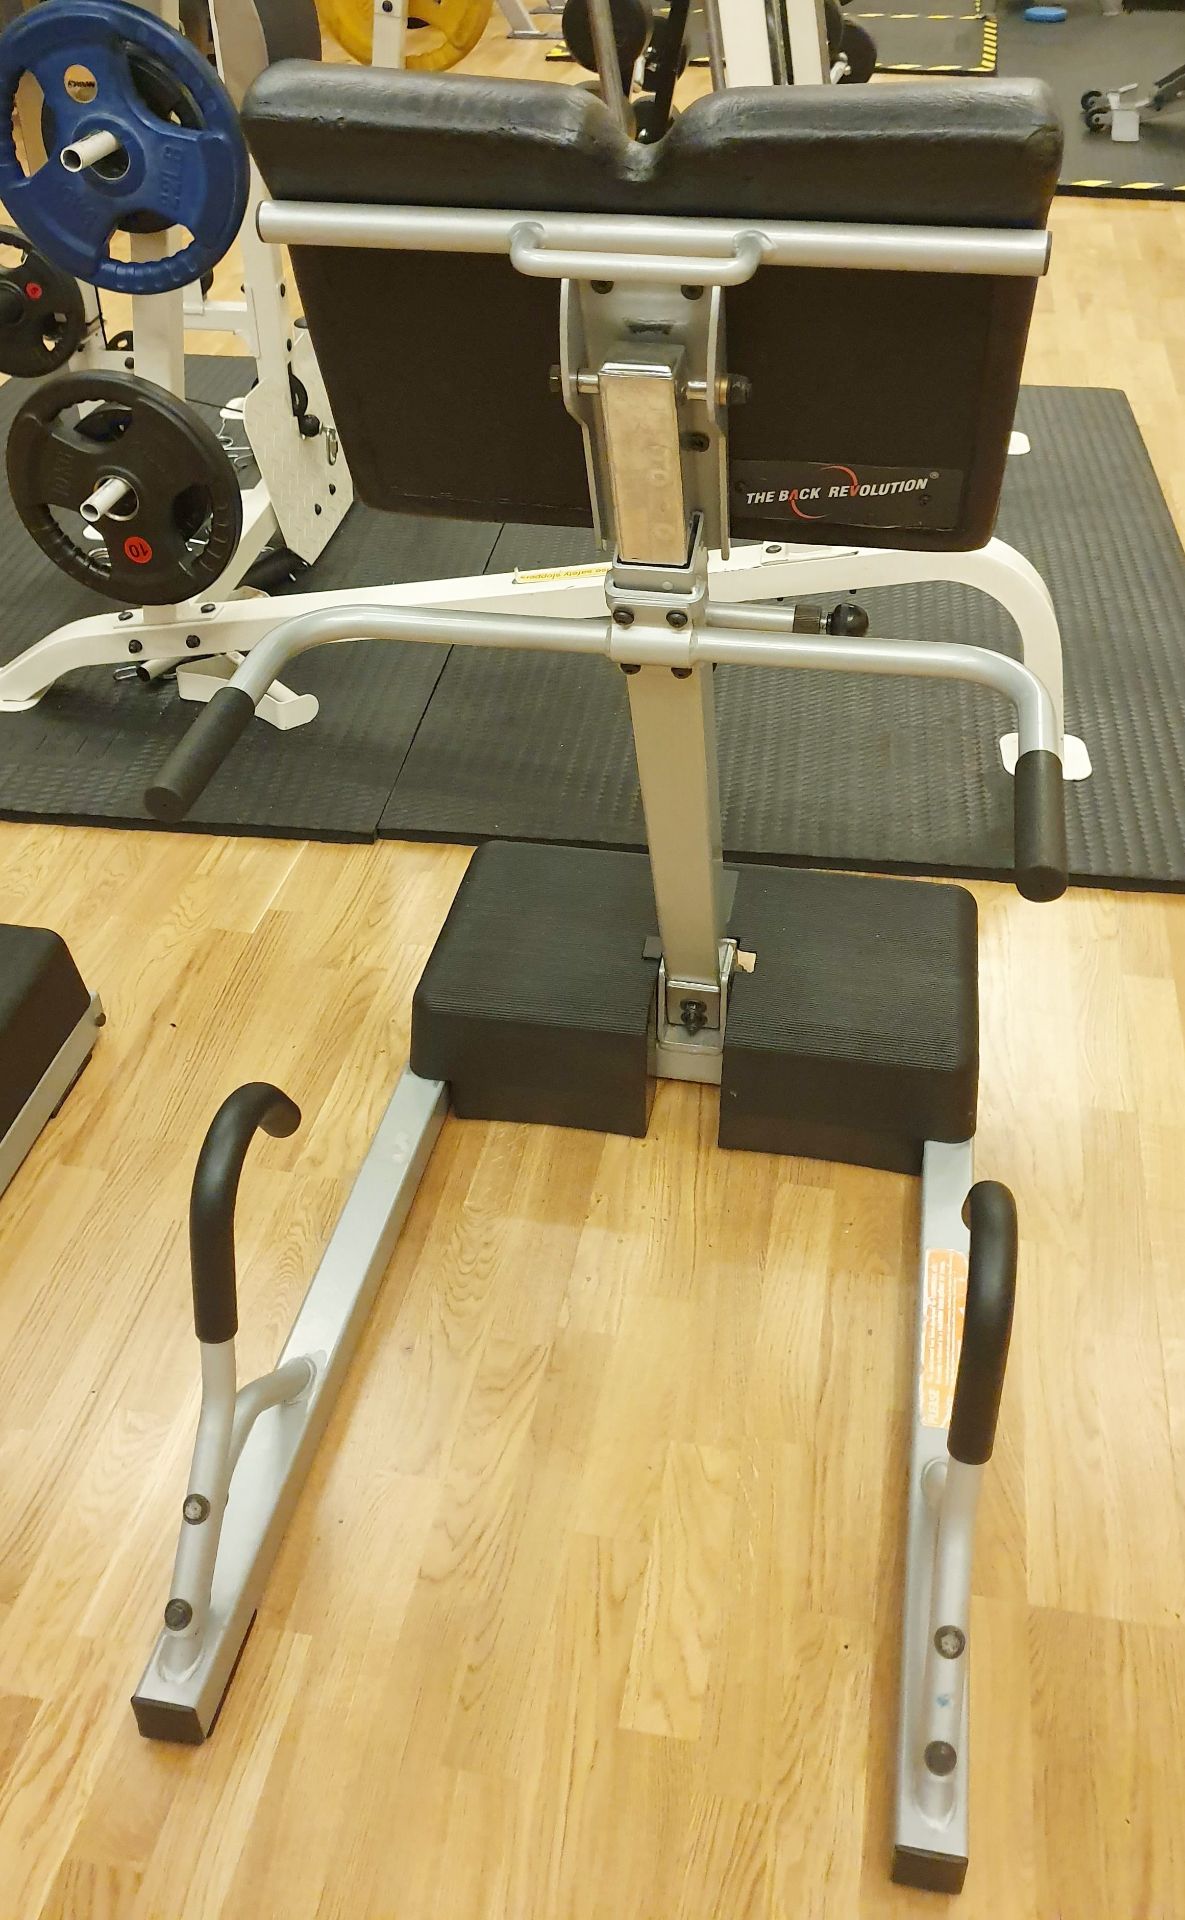 1 x Back Revolution Exercise Stretching Gym Machine - CL552 - Location: Altrincham WA14 - Image 7 of 8